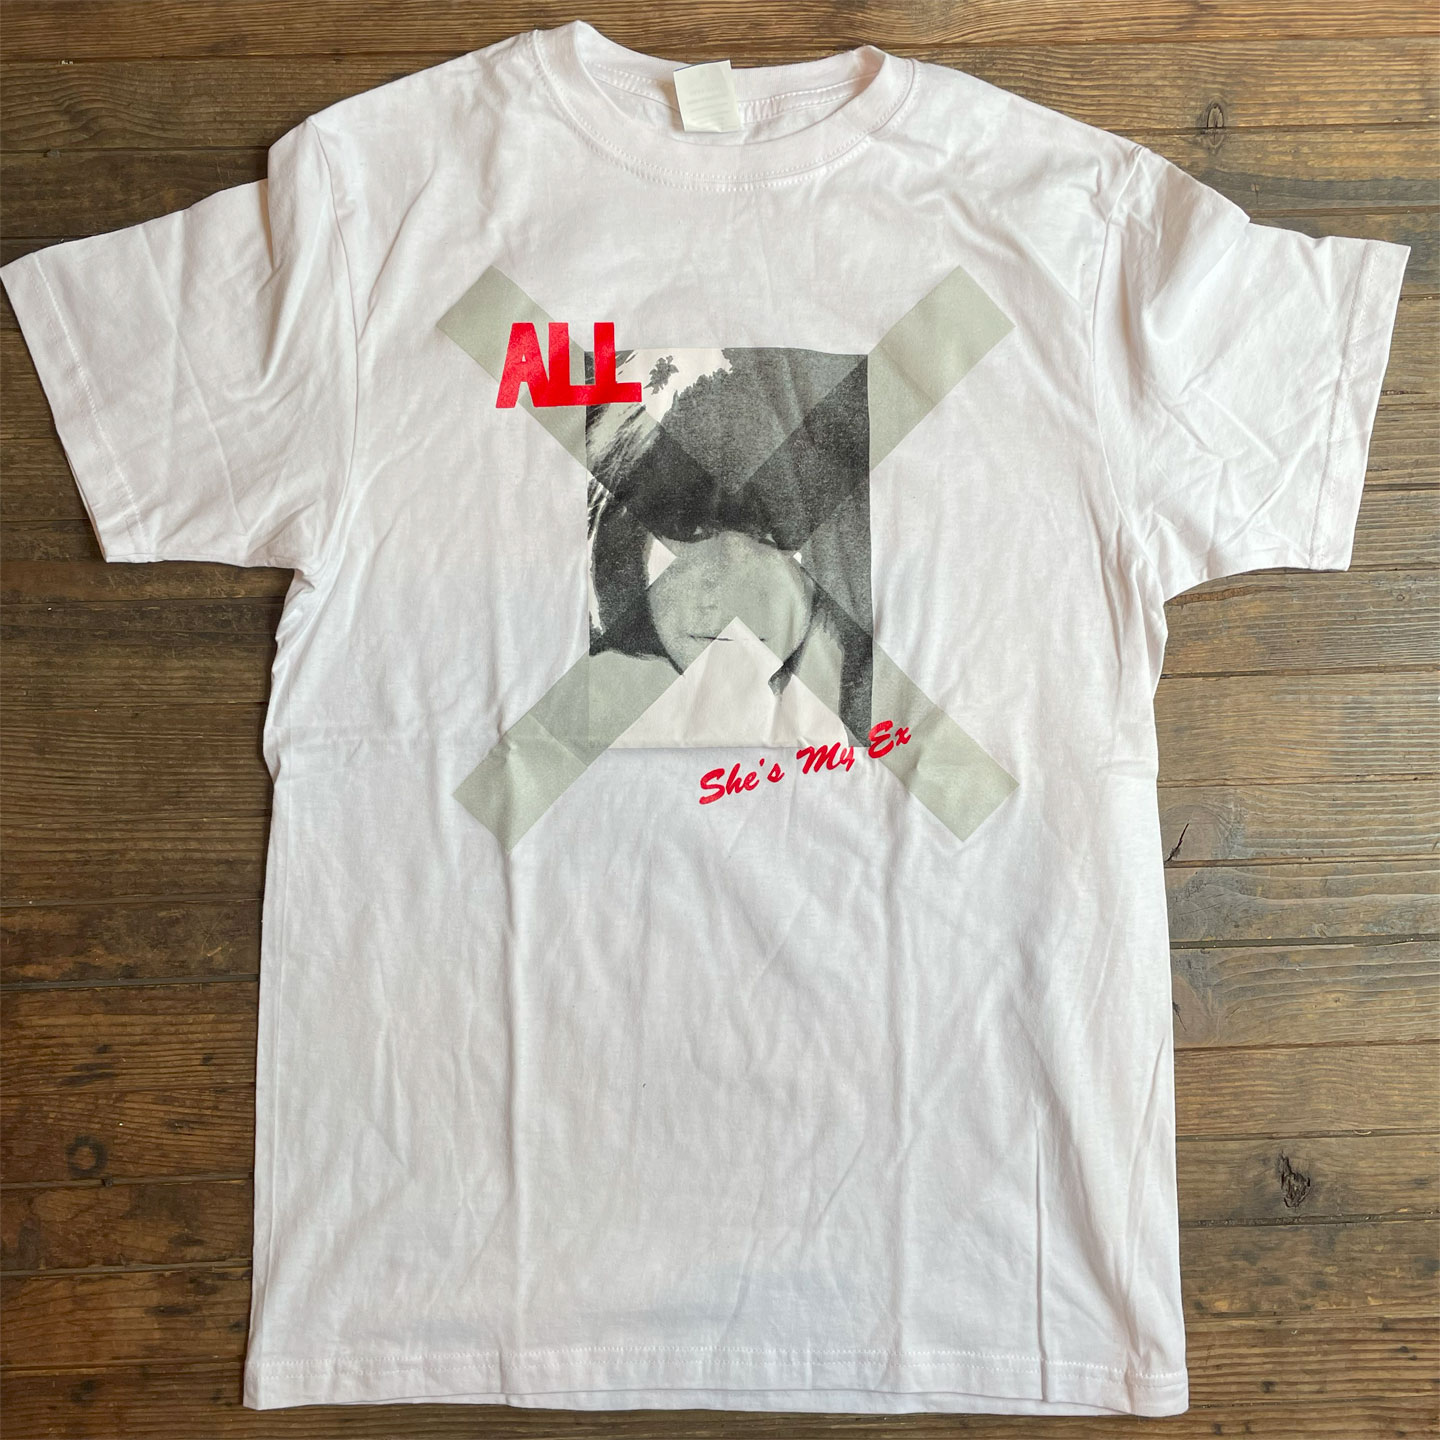 ALL Tシャツ SHE'S MY EX